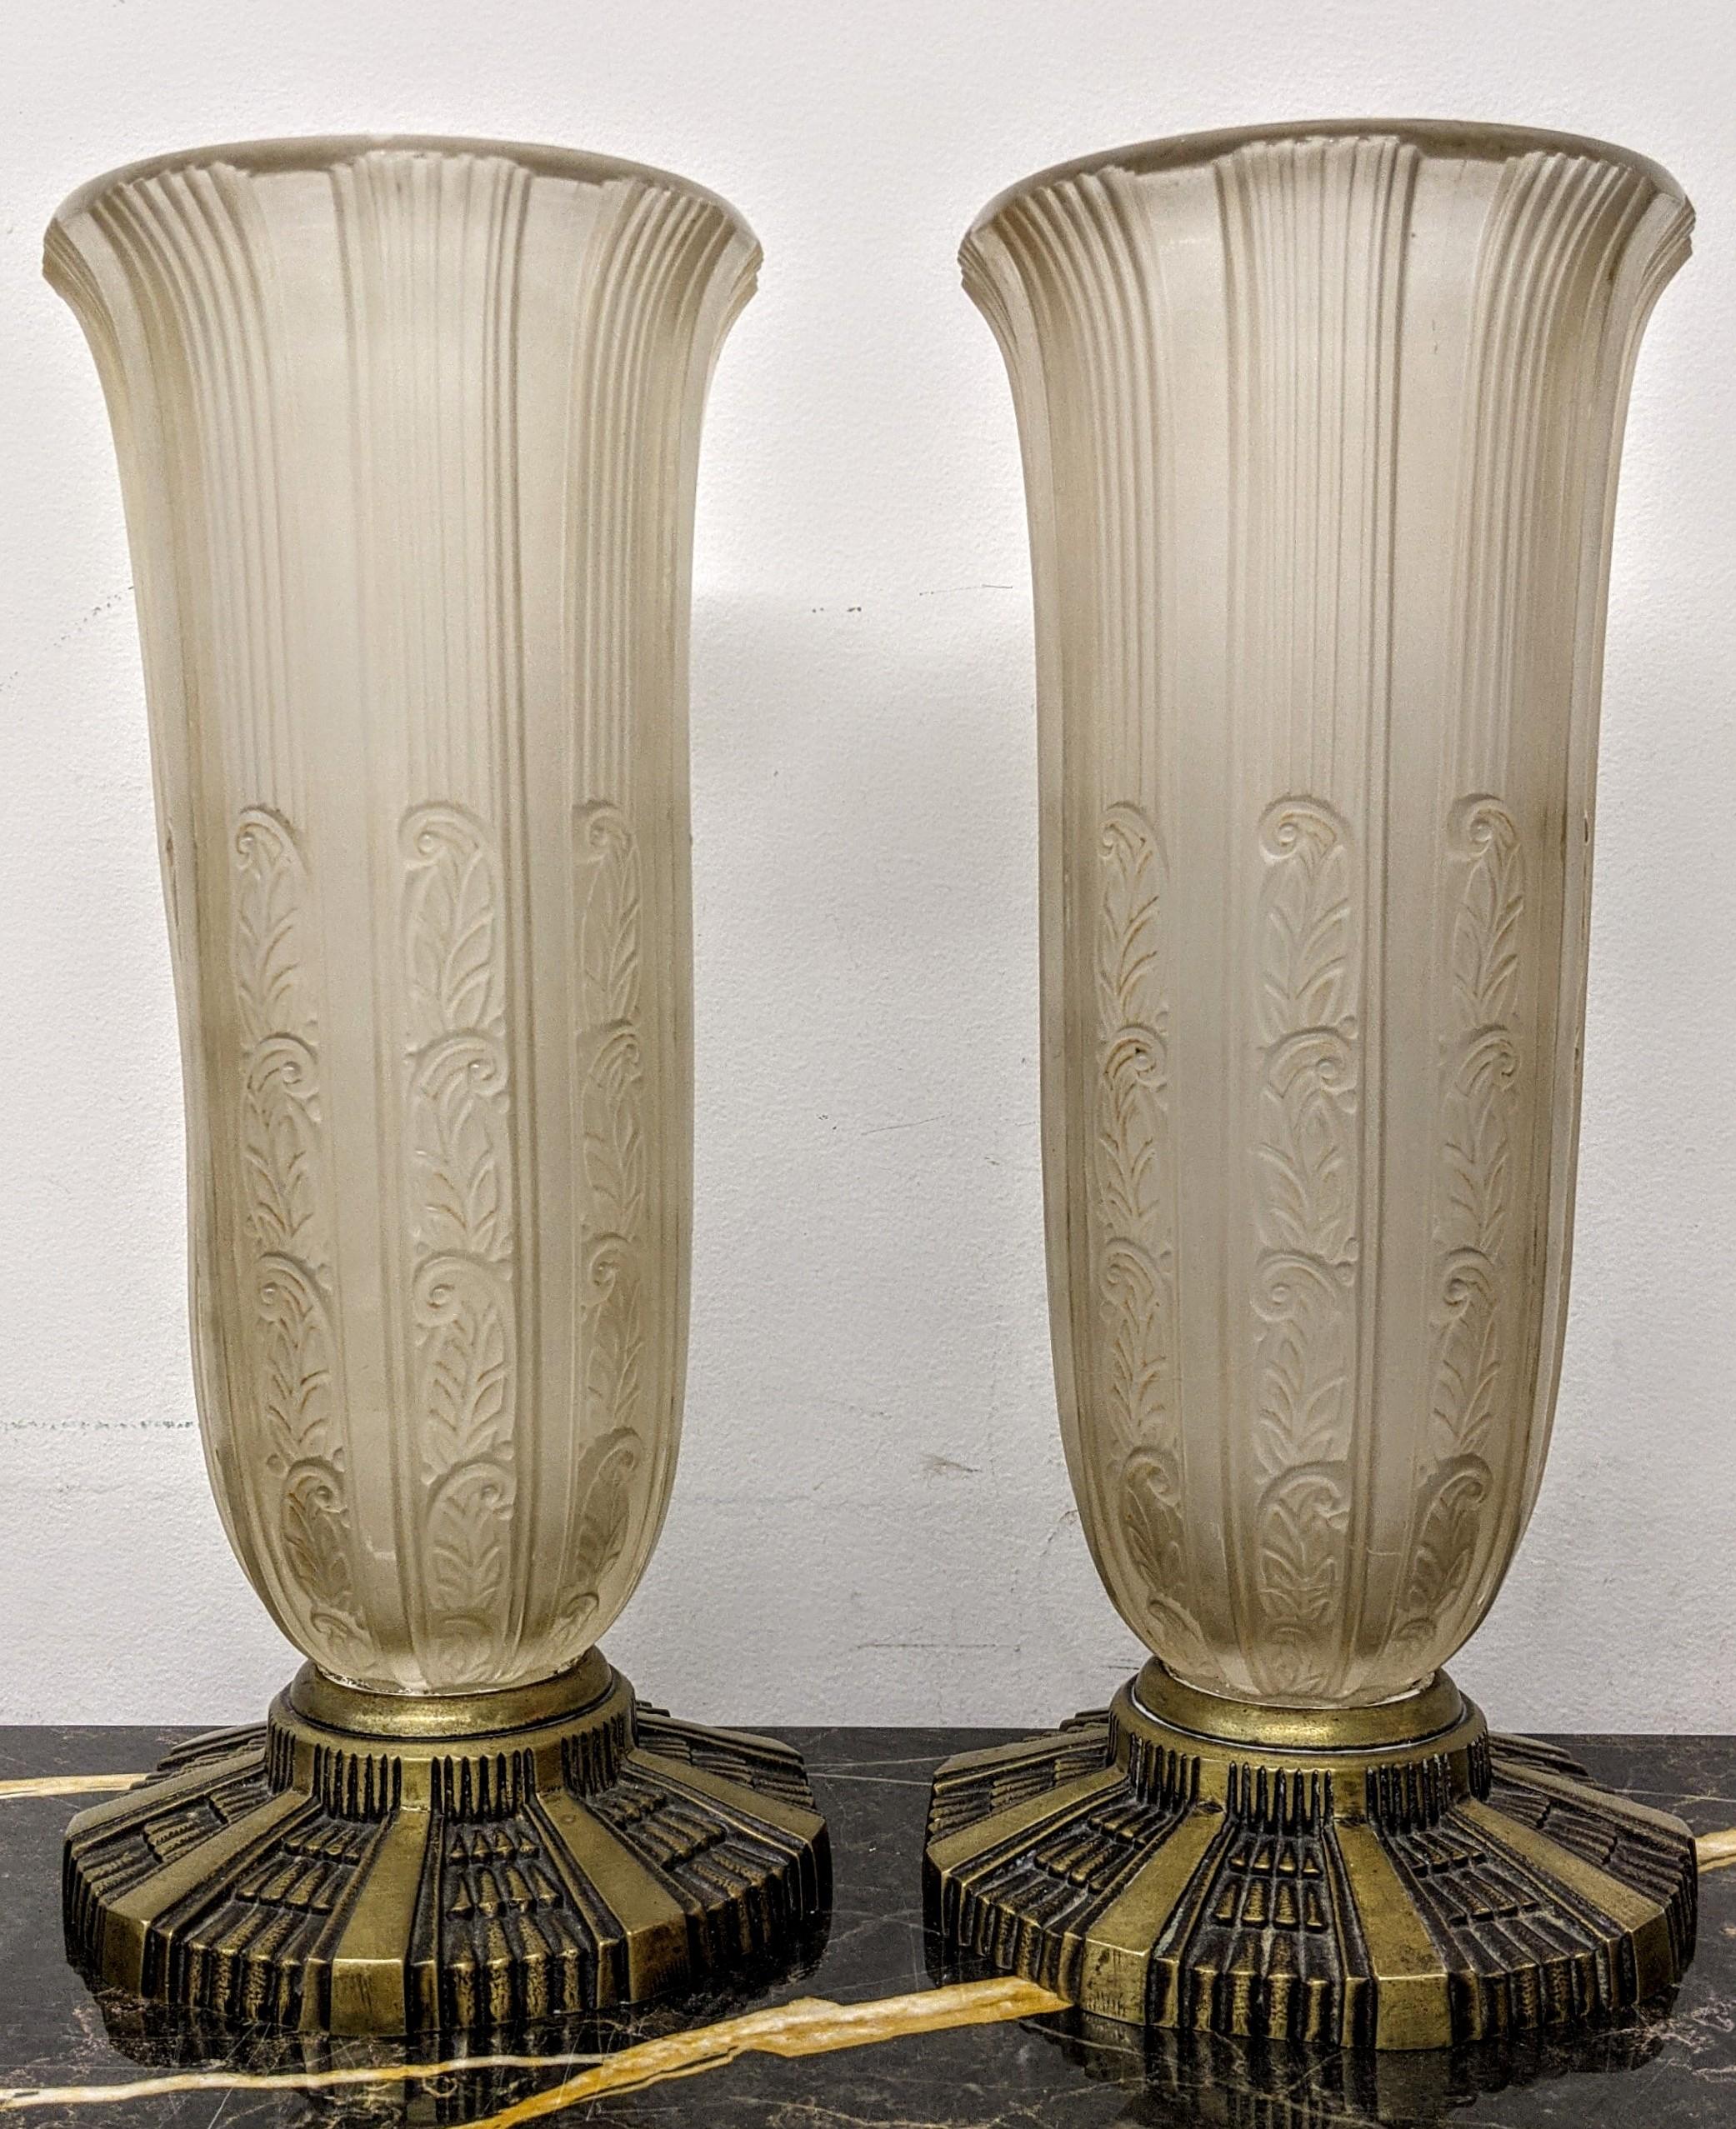 Cast Pair of French Art Deco Glass Vases by Hettier & Vincent